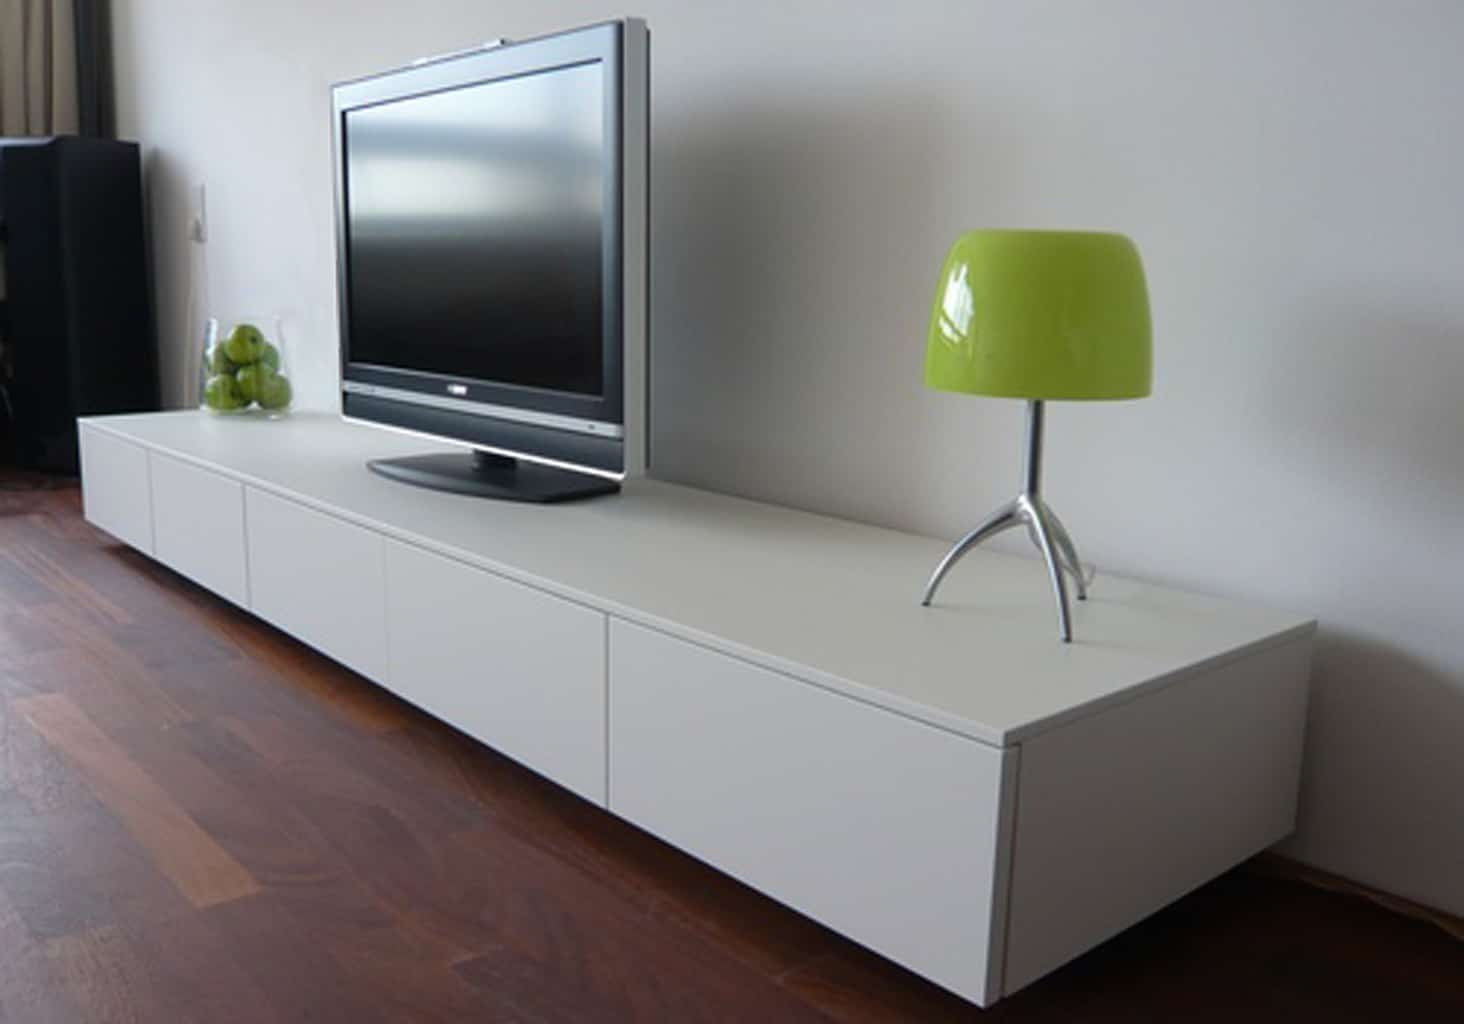 A large flat screen TV sits on a modern looking white console table